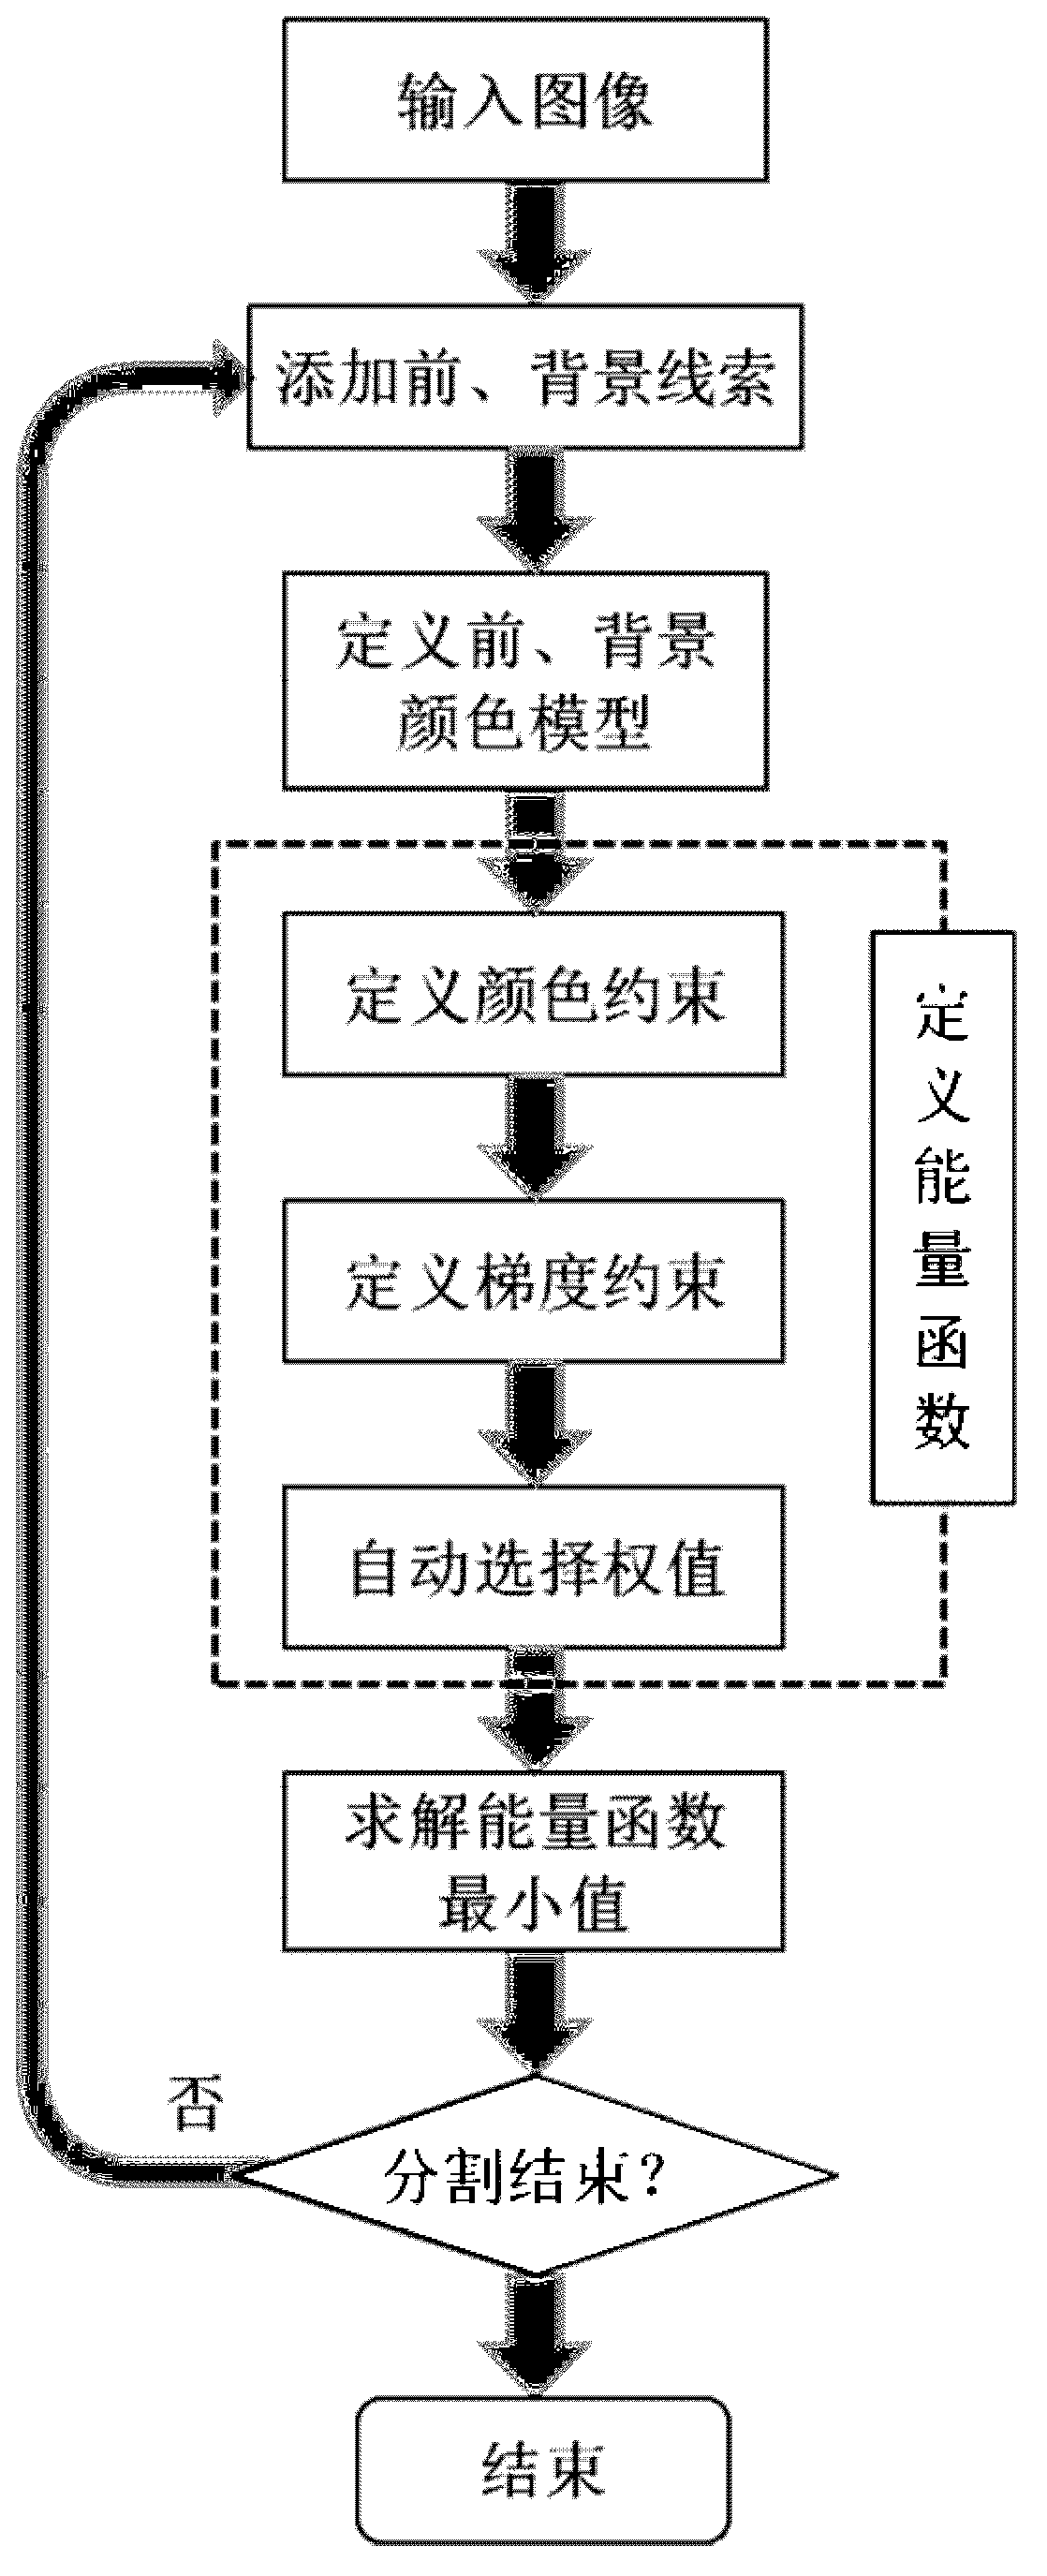 Method for segmenting images by aid of automatic weight selection